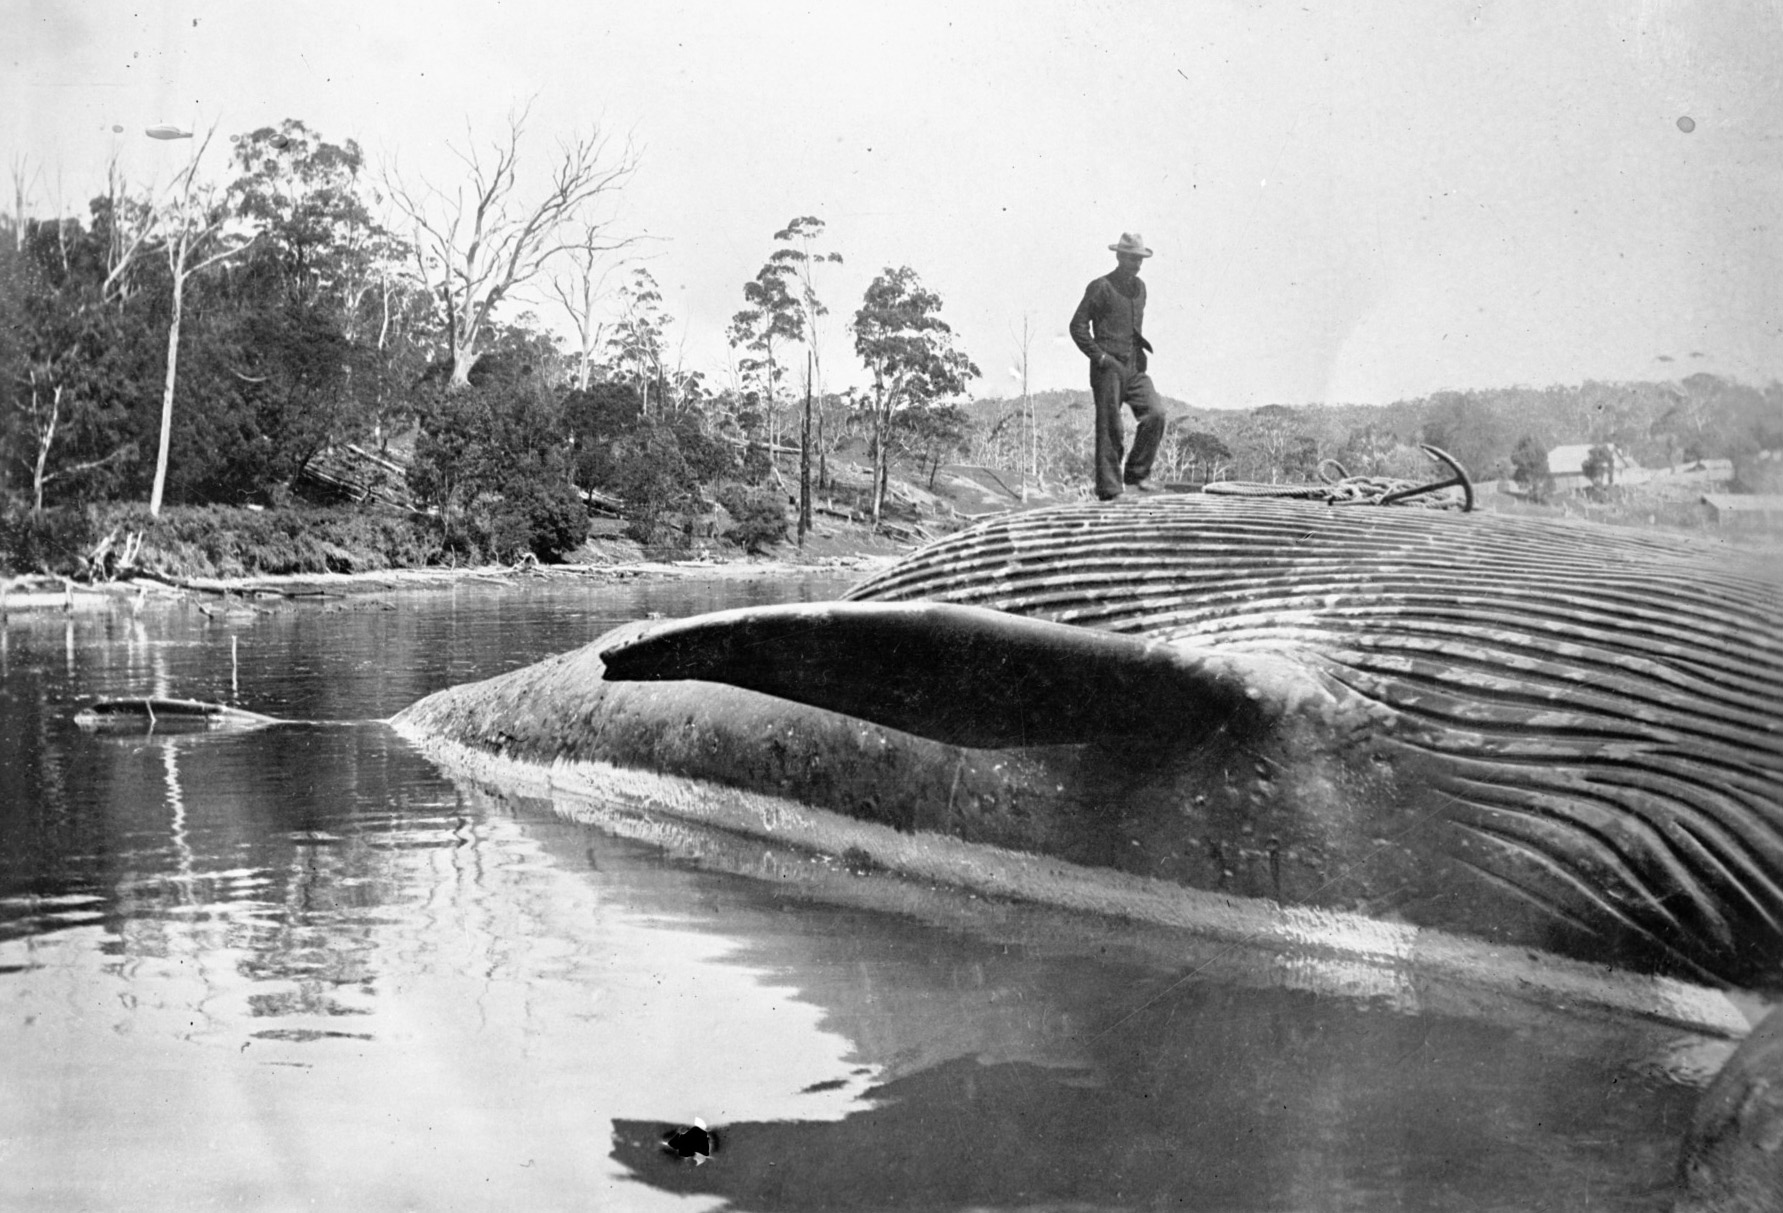 <p>A man on a dead whale, Twofold Bay, New South Wales</p>
